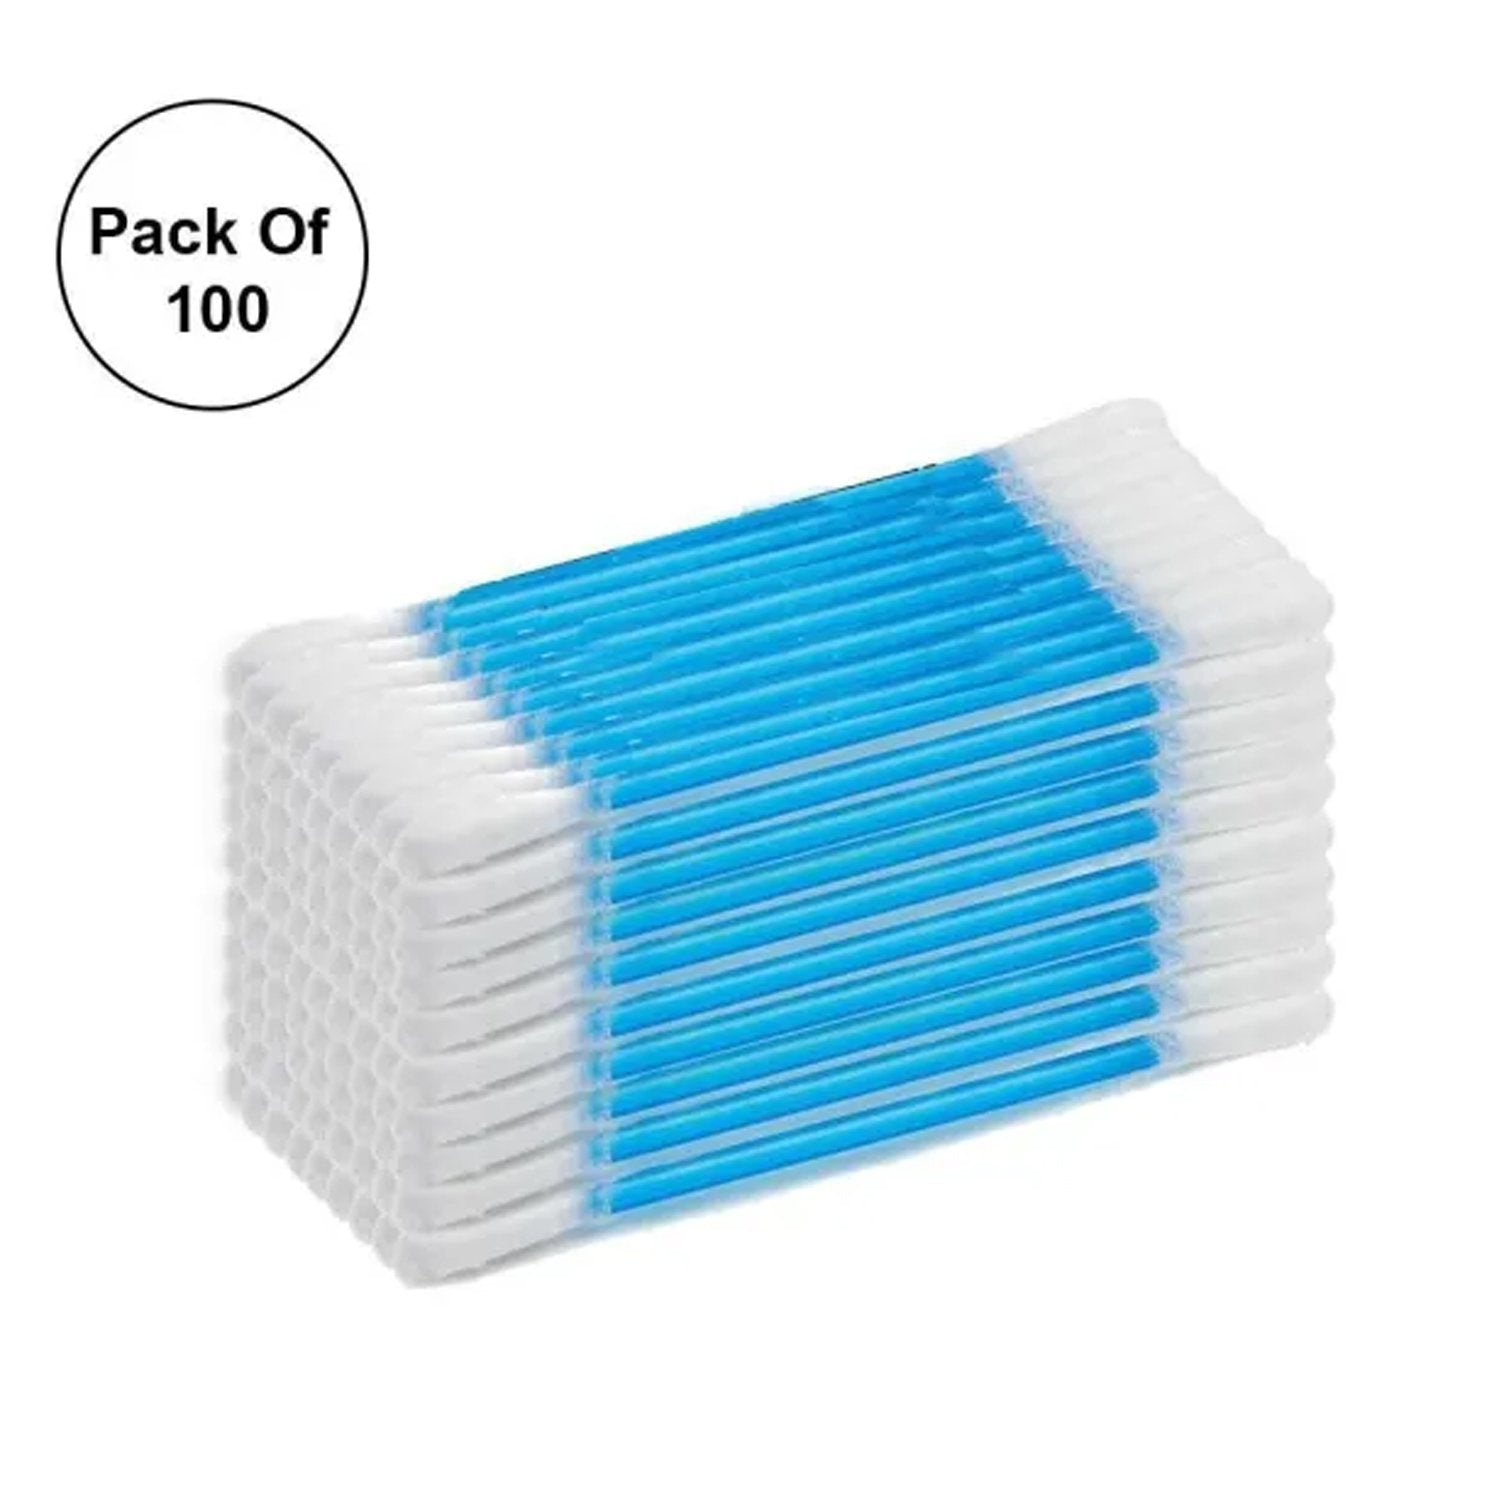 6010 Small Cotton Buds for ear cleaning, soft and natural cotton swabs (100 per pack)